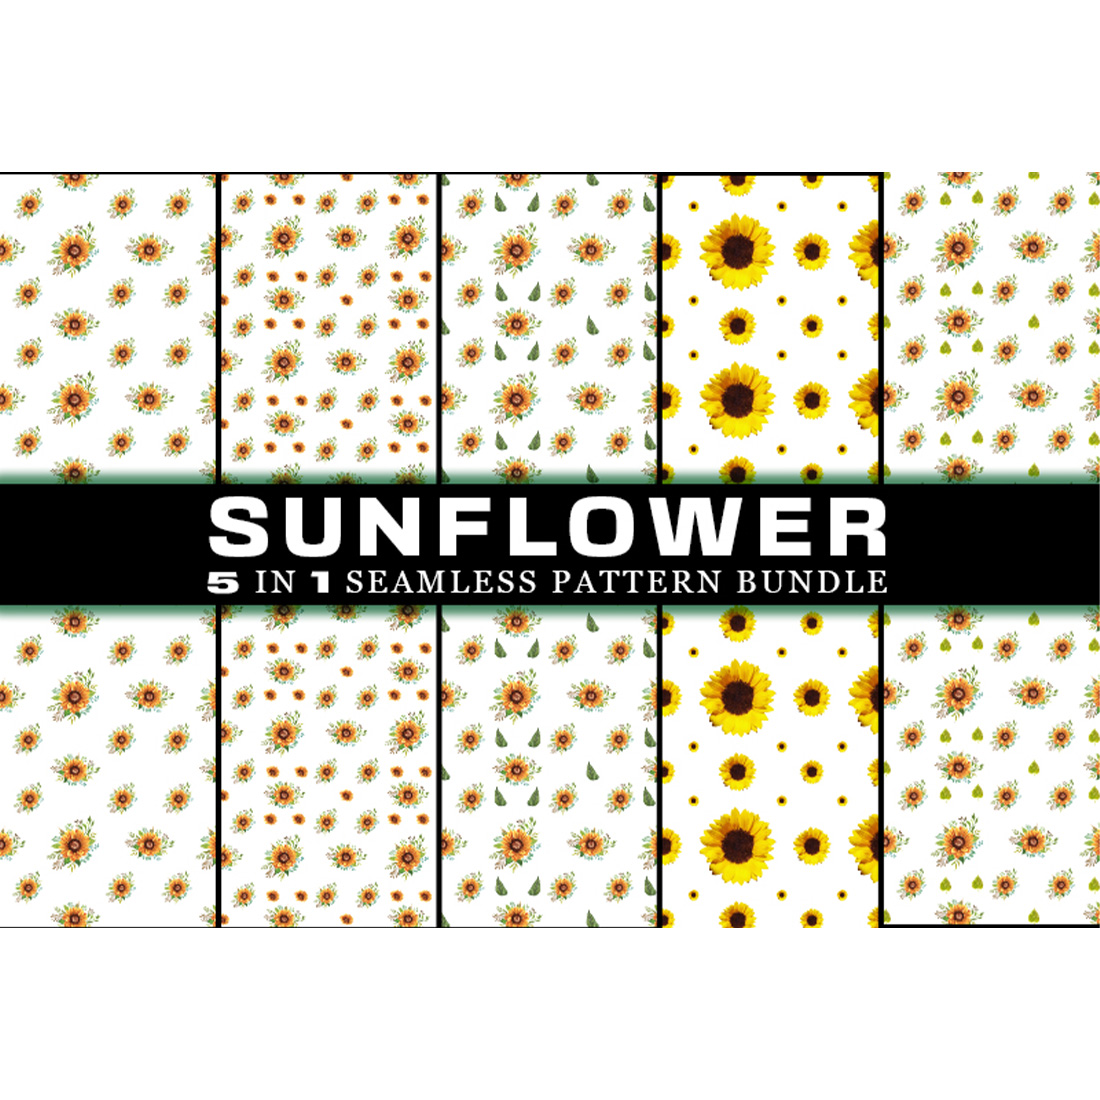 Flower Seamless Pattern Digital Papers. V.2 main cover.